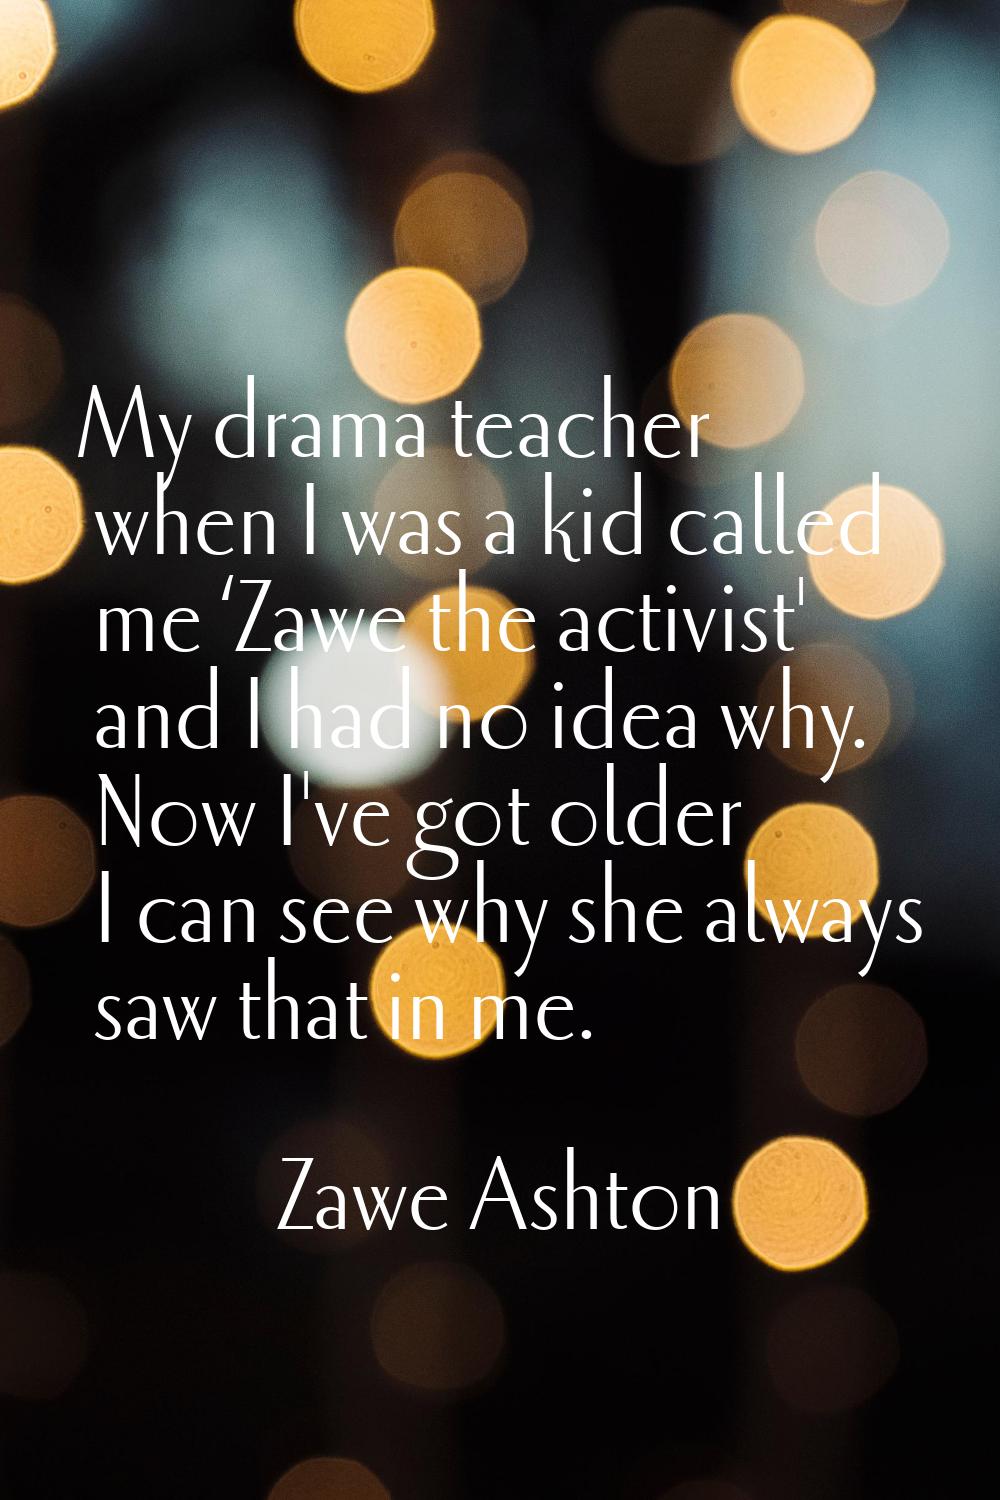 My drama teacher when I was a kid called me ‘Zawe the activist' and I had no idea why. Now I've got